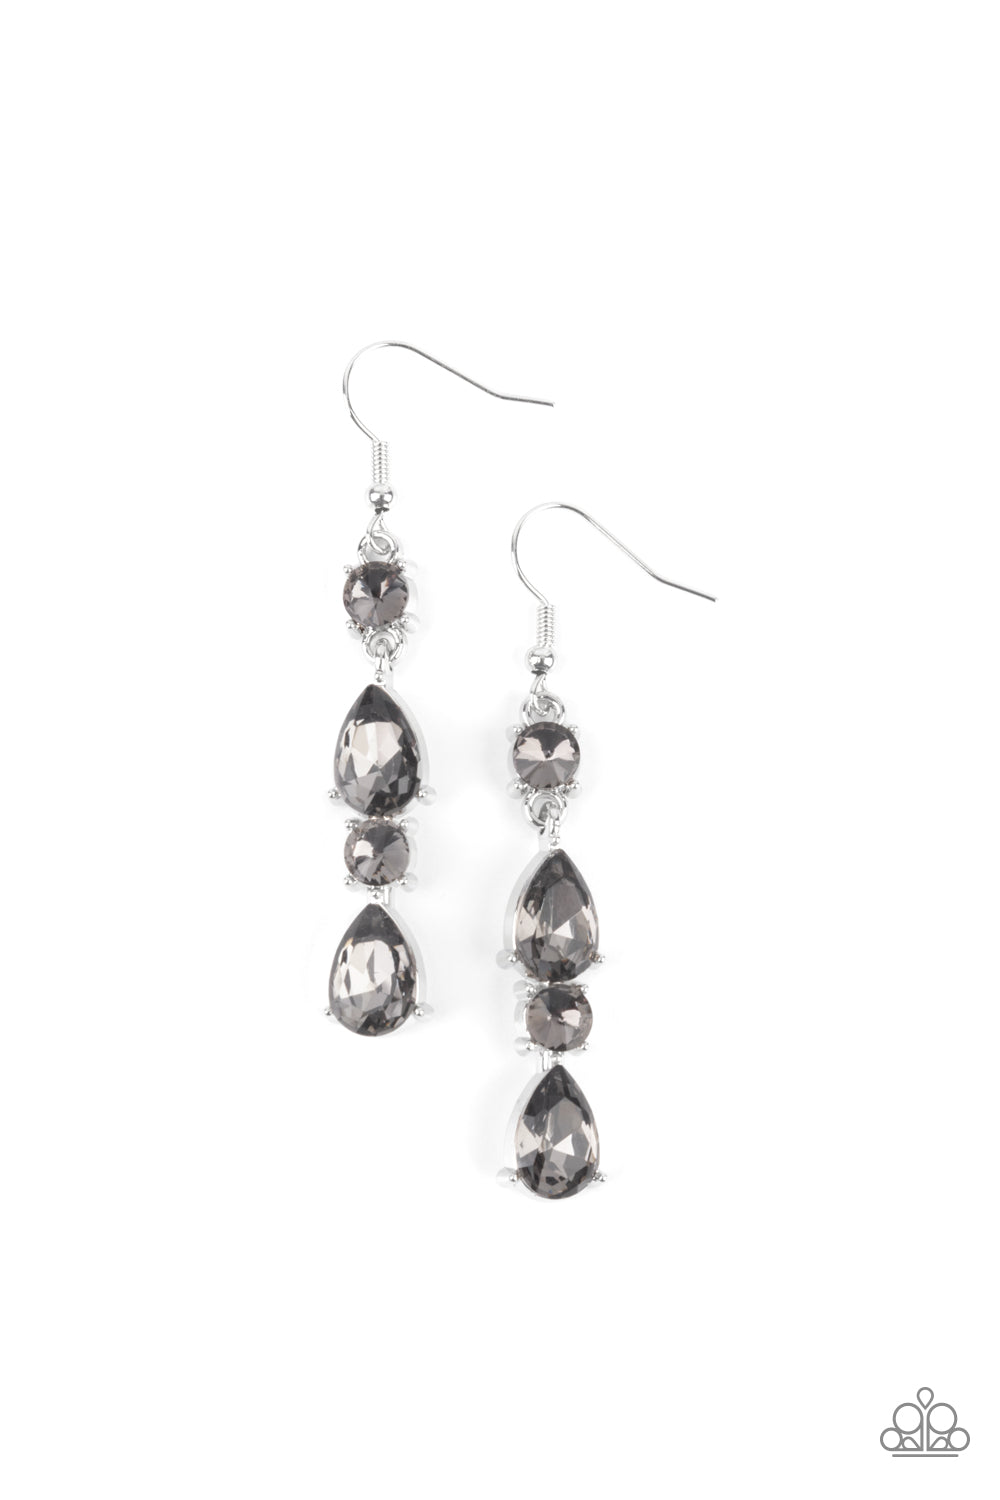 Raise Your Glass To Glamorous Earring (Black, Silver)